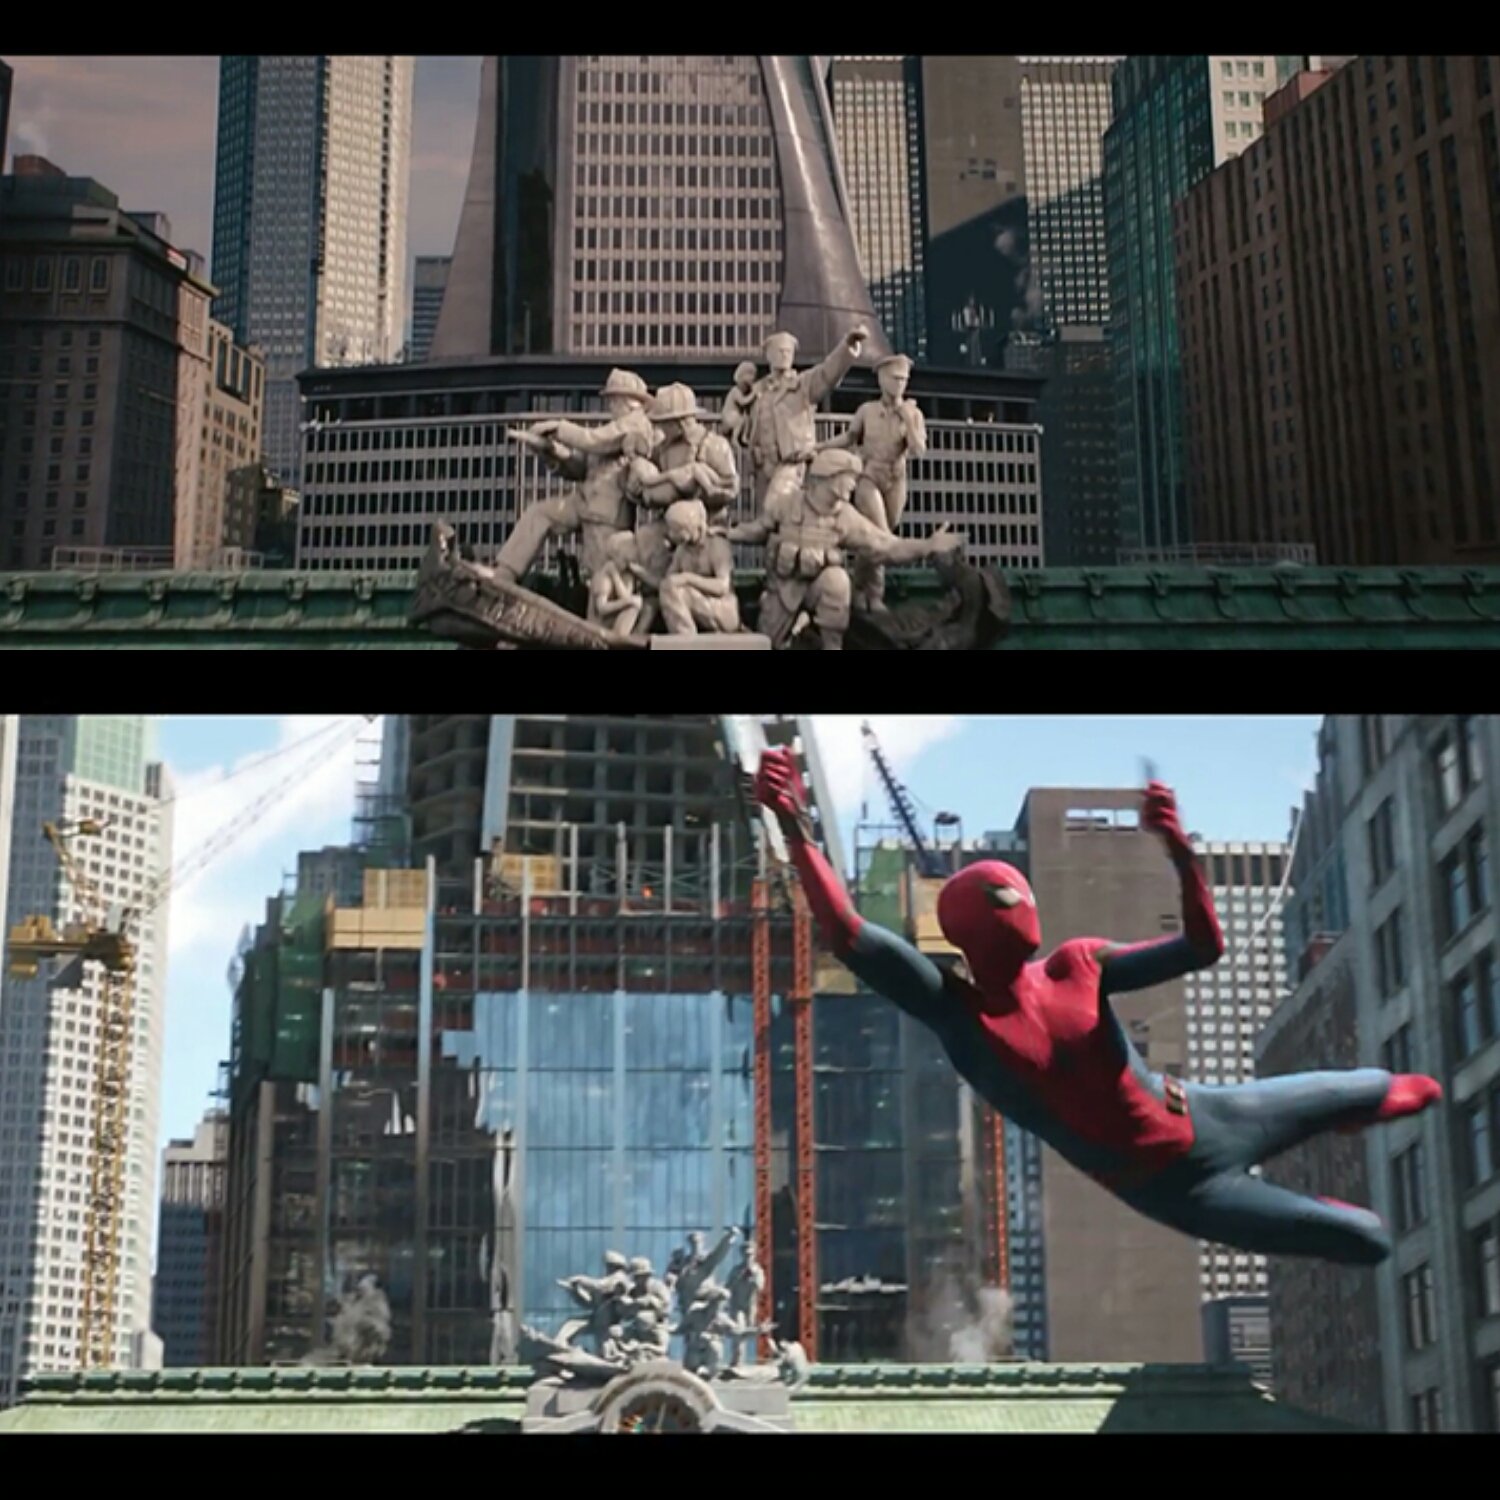 Taran Stark on Twitter: "avengers tower under construction is giving me major SPIDER-MAN ps4 vibes! it's becoming the oscorp tower? https://t.co/Y9JqPf5LpA" / Twitter